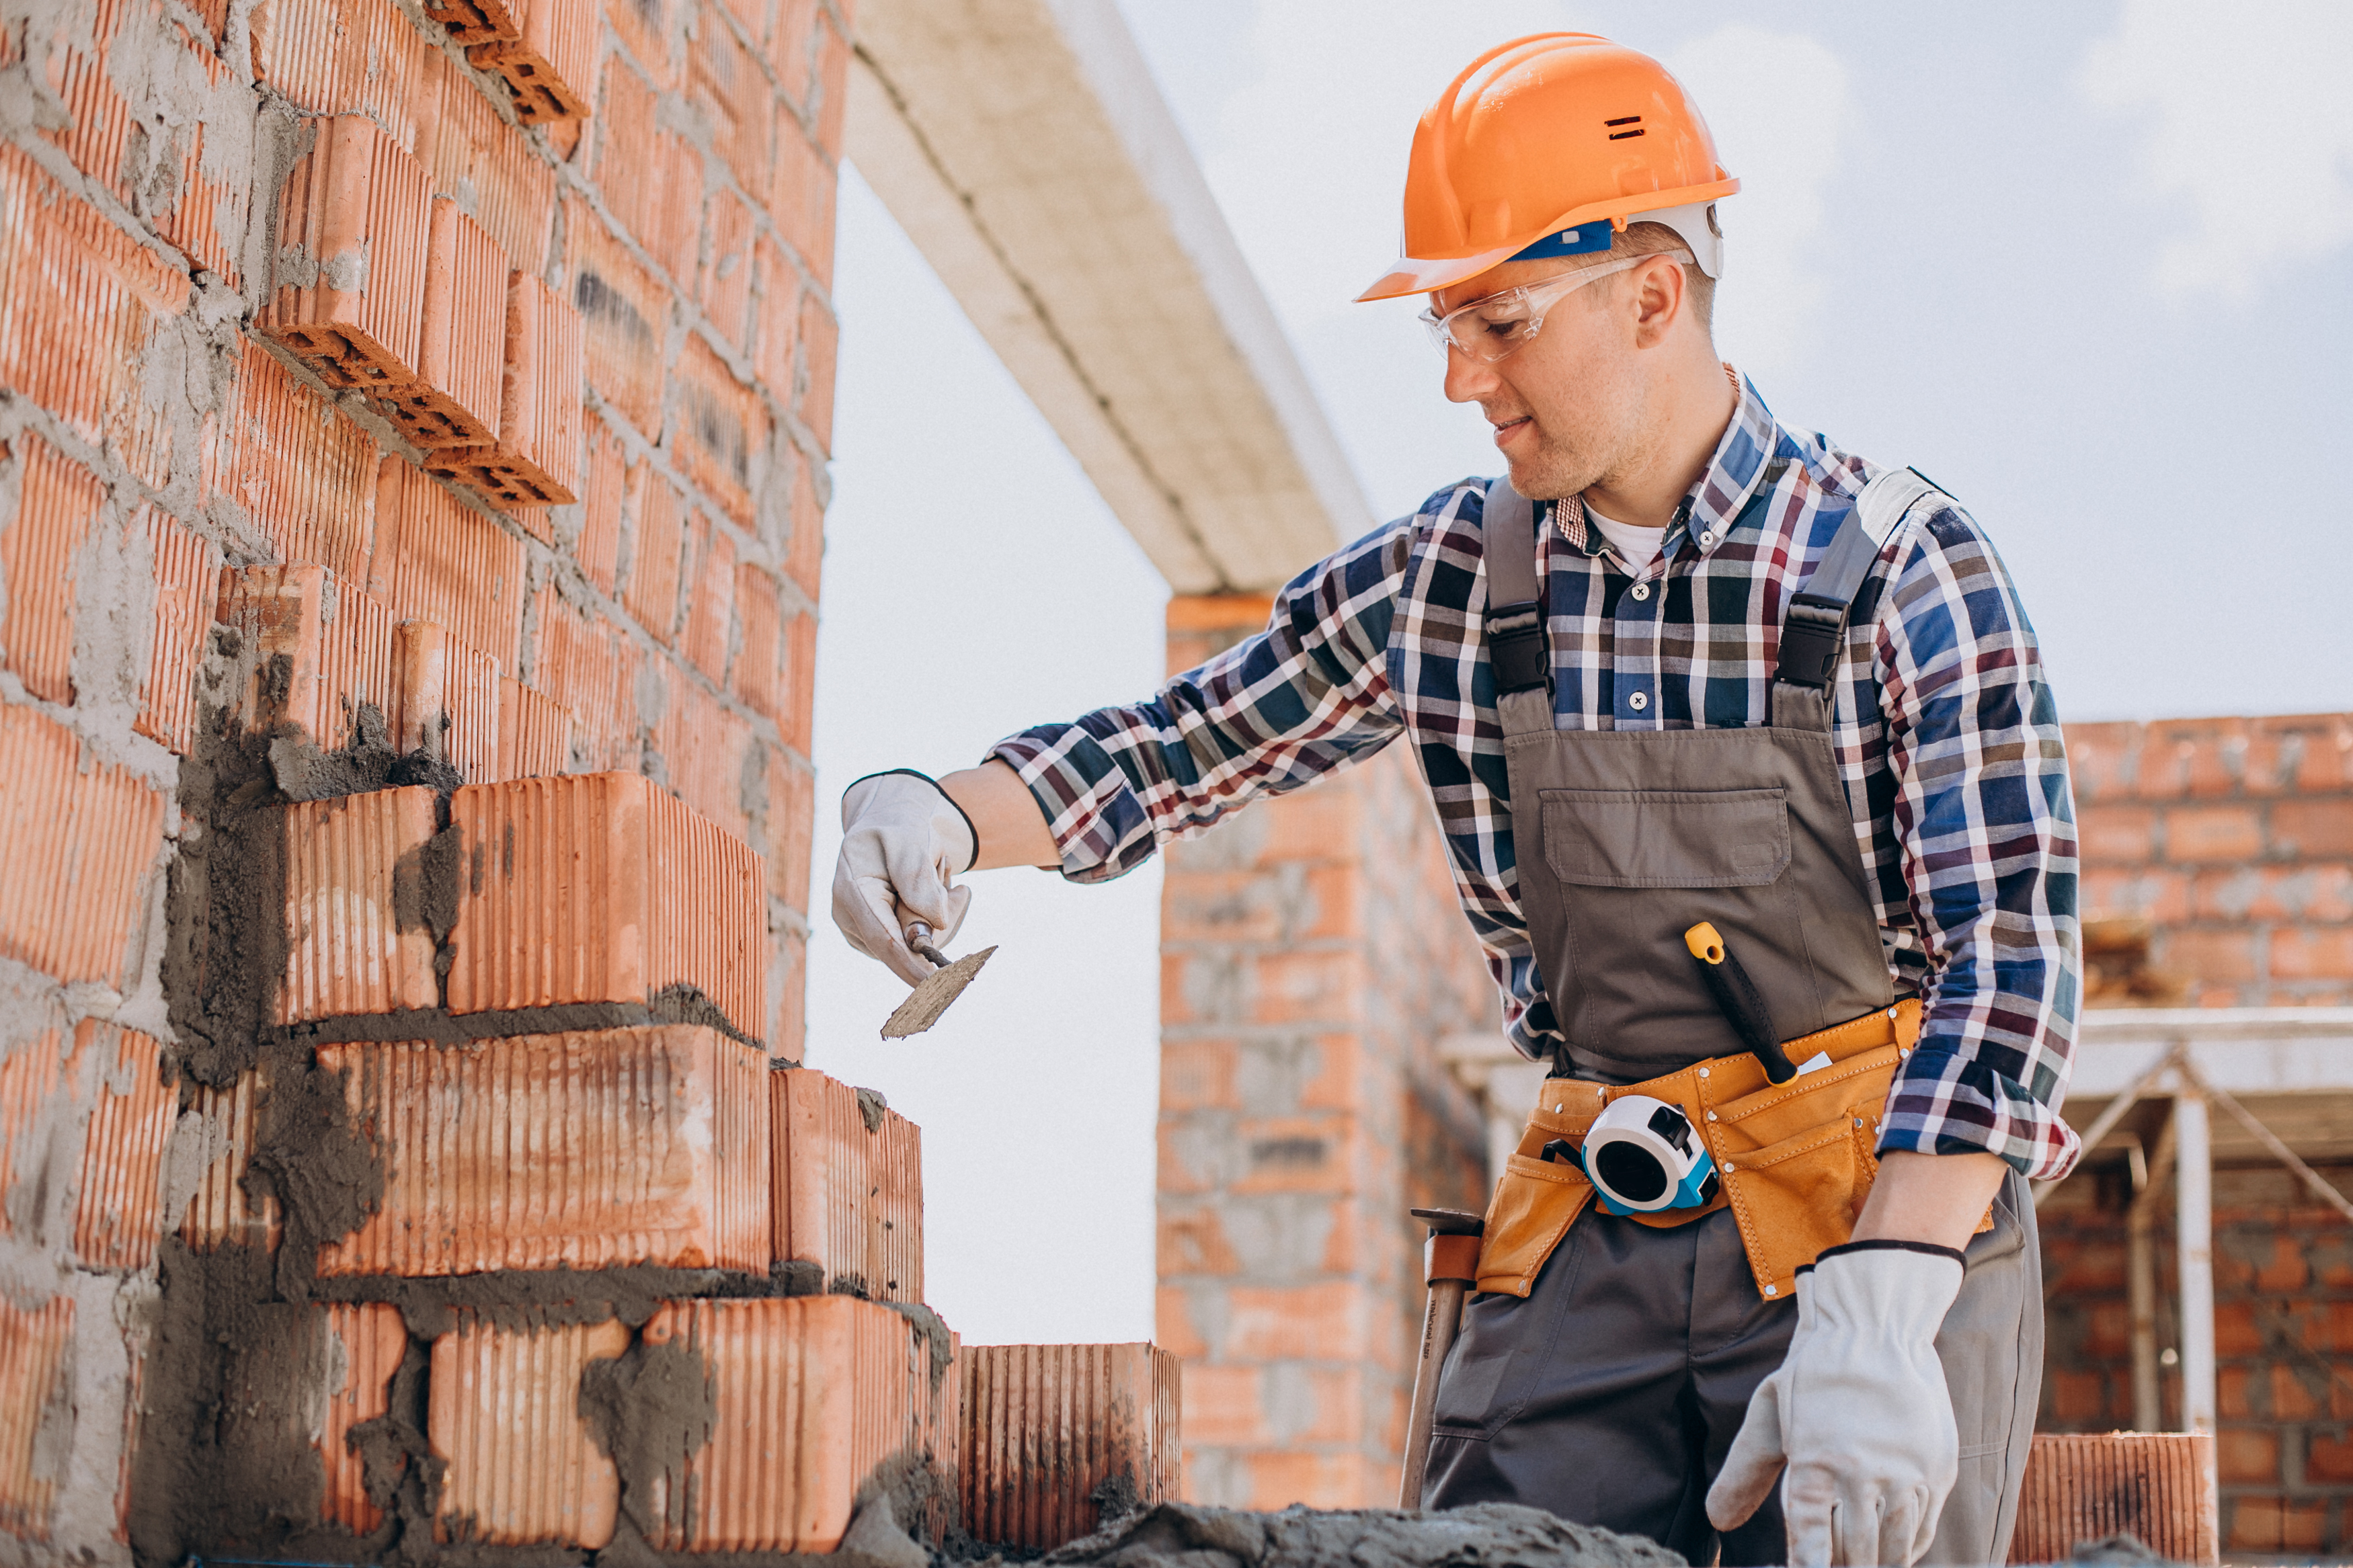 One of the Best Masons Near Ottawa is wearing an orange hard hat, safety glasses, coveralls, and a plaid shirt & gloves. He is holding a brick trowel and is preparing to set the next row of bricks.